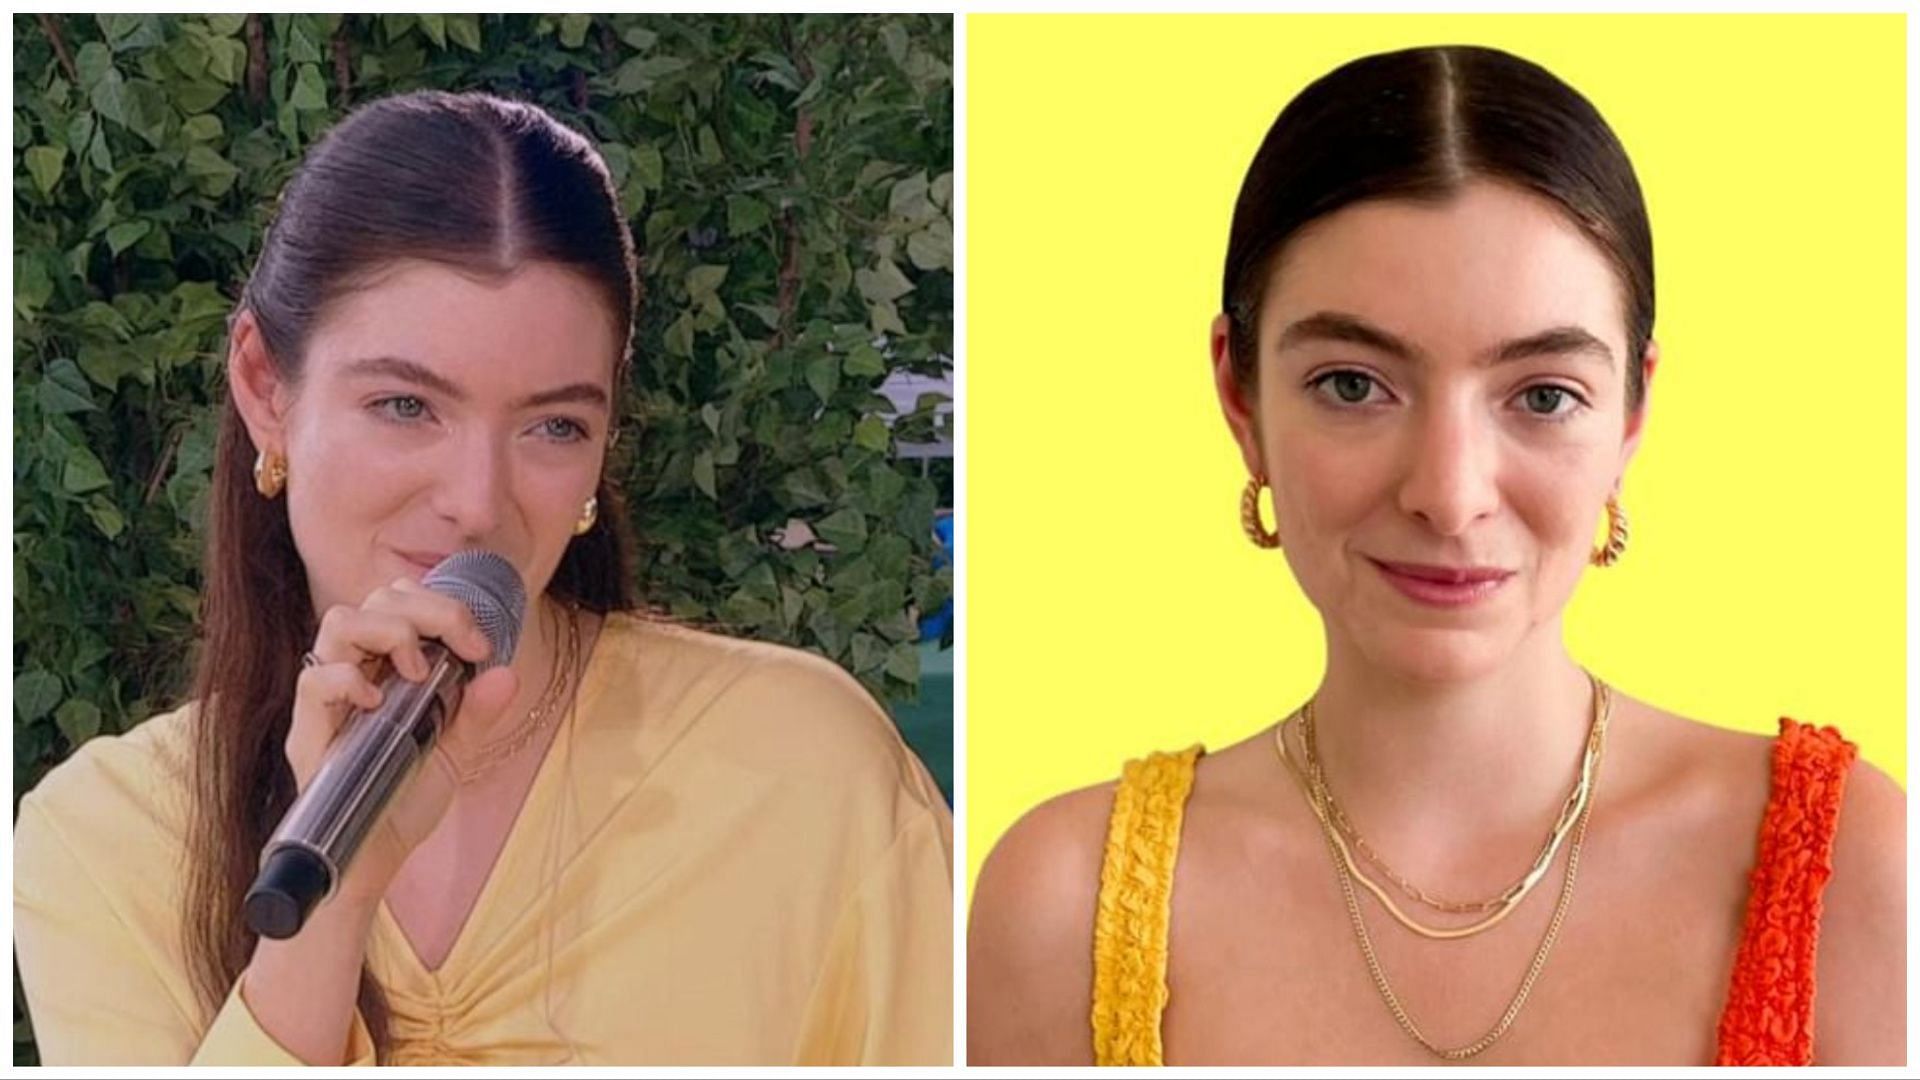 The pop star opened up about her relatiosnhip and recent heartbreak (Image via Facebook / @Lorde)